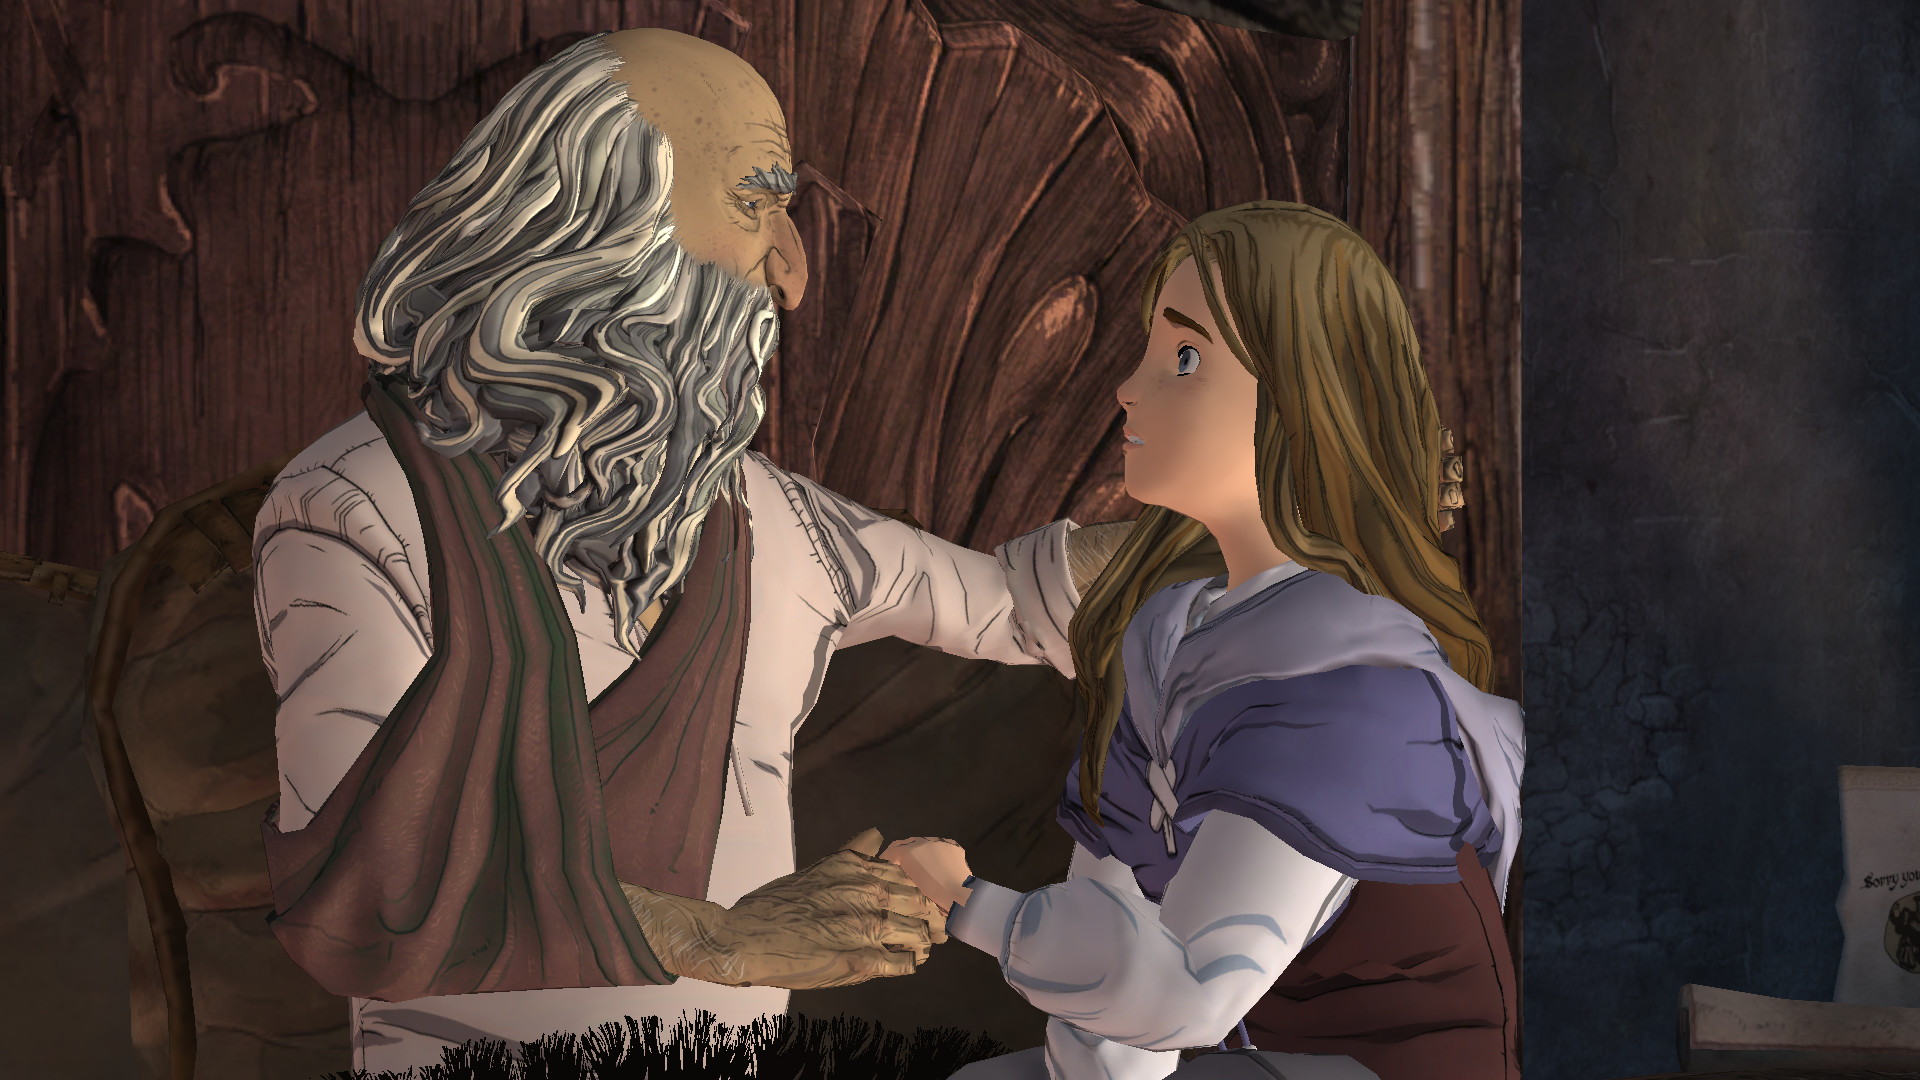 King's Quest - Chapter 5: The Good Knight - screenshot 5